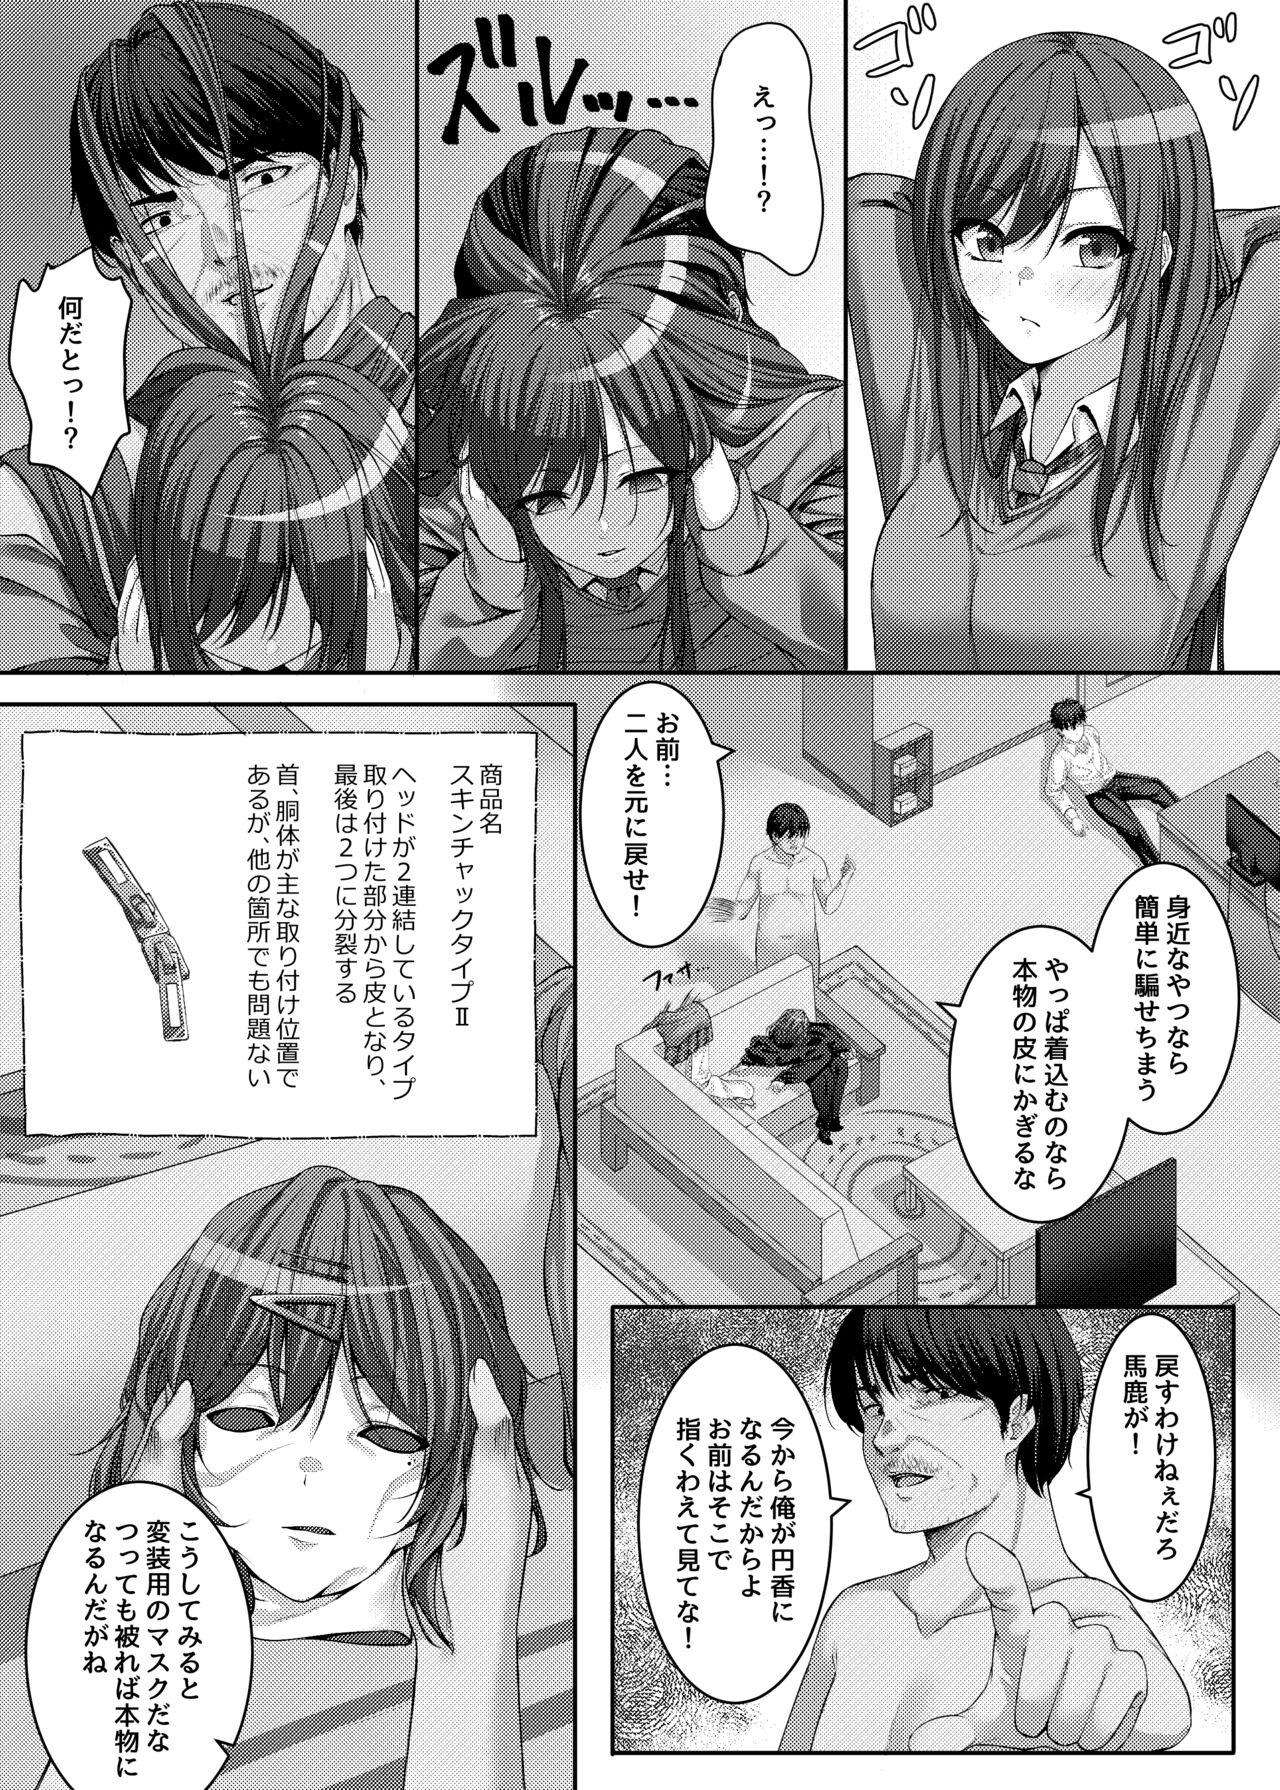 Free Rough Porn 移り皮り～円香編～ - The idolmaster Public - Page 3